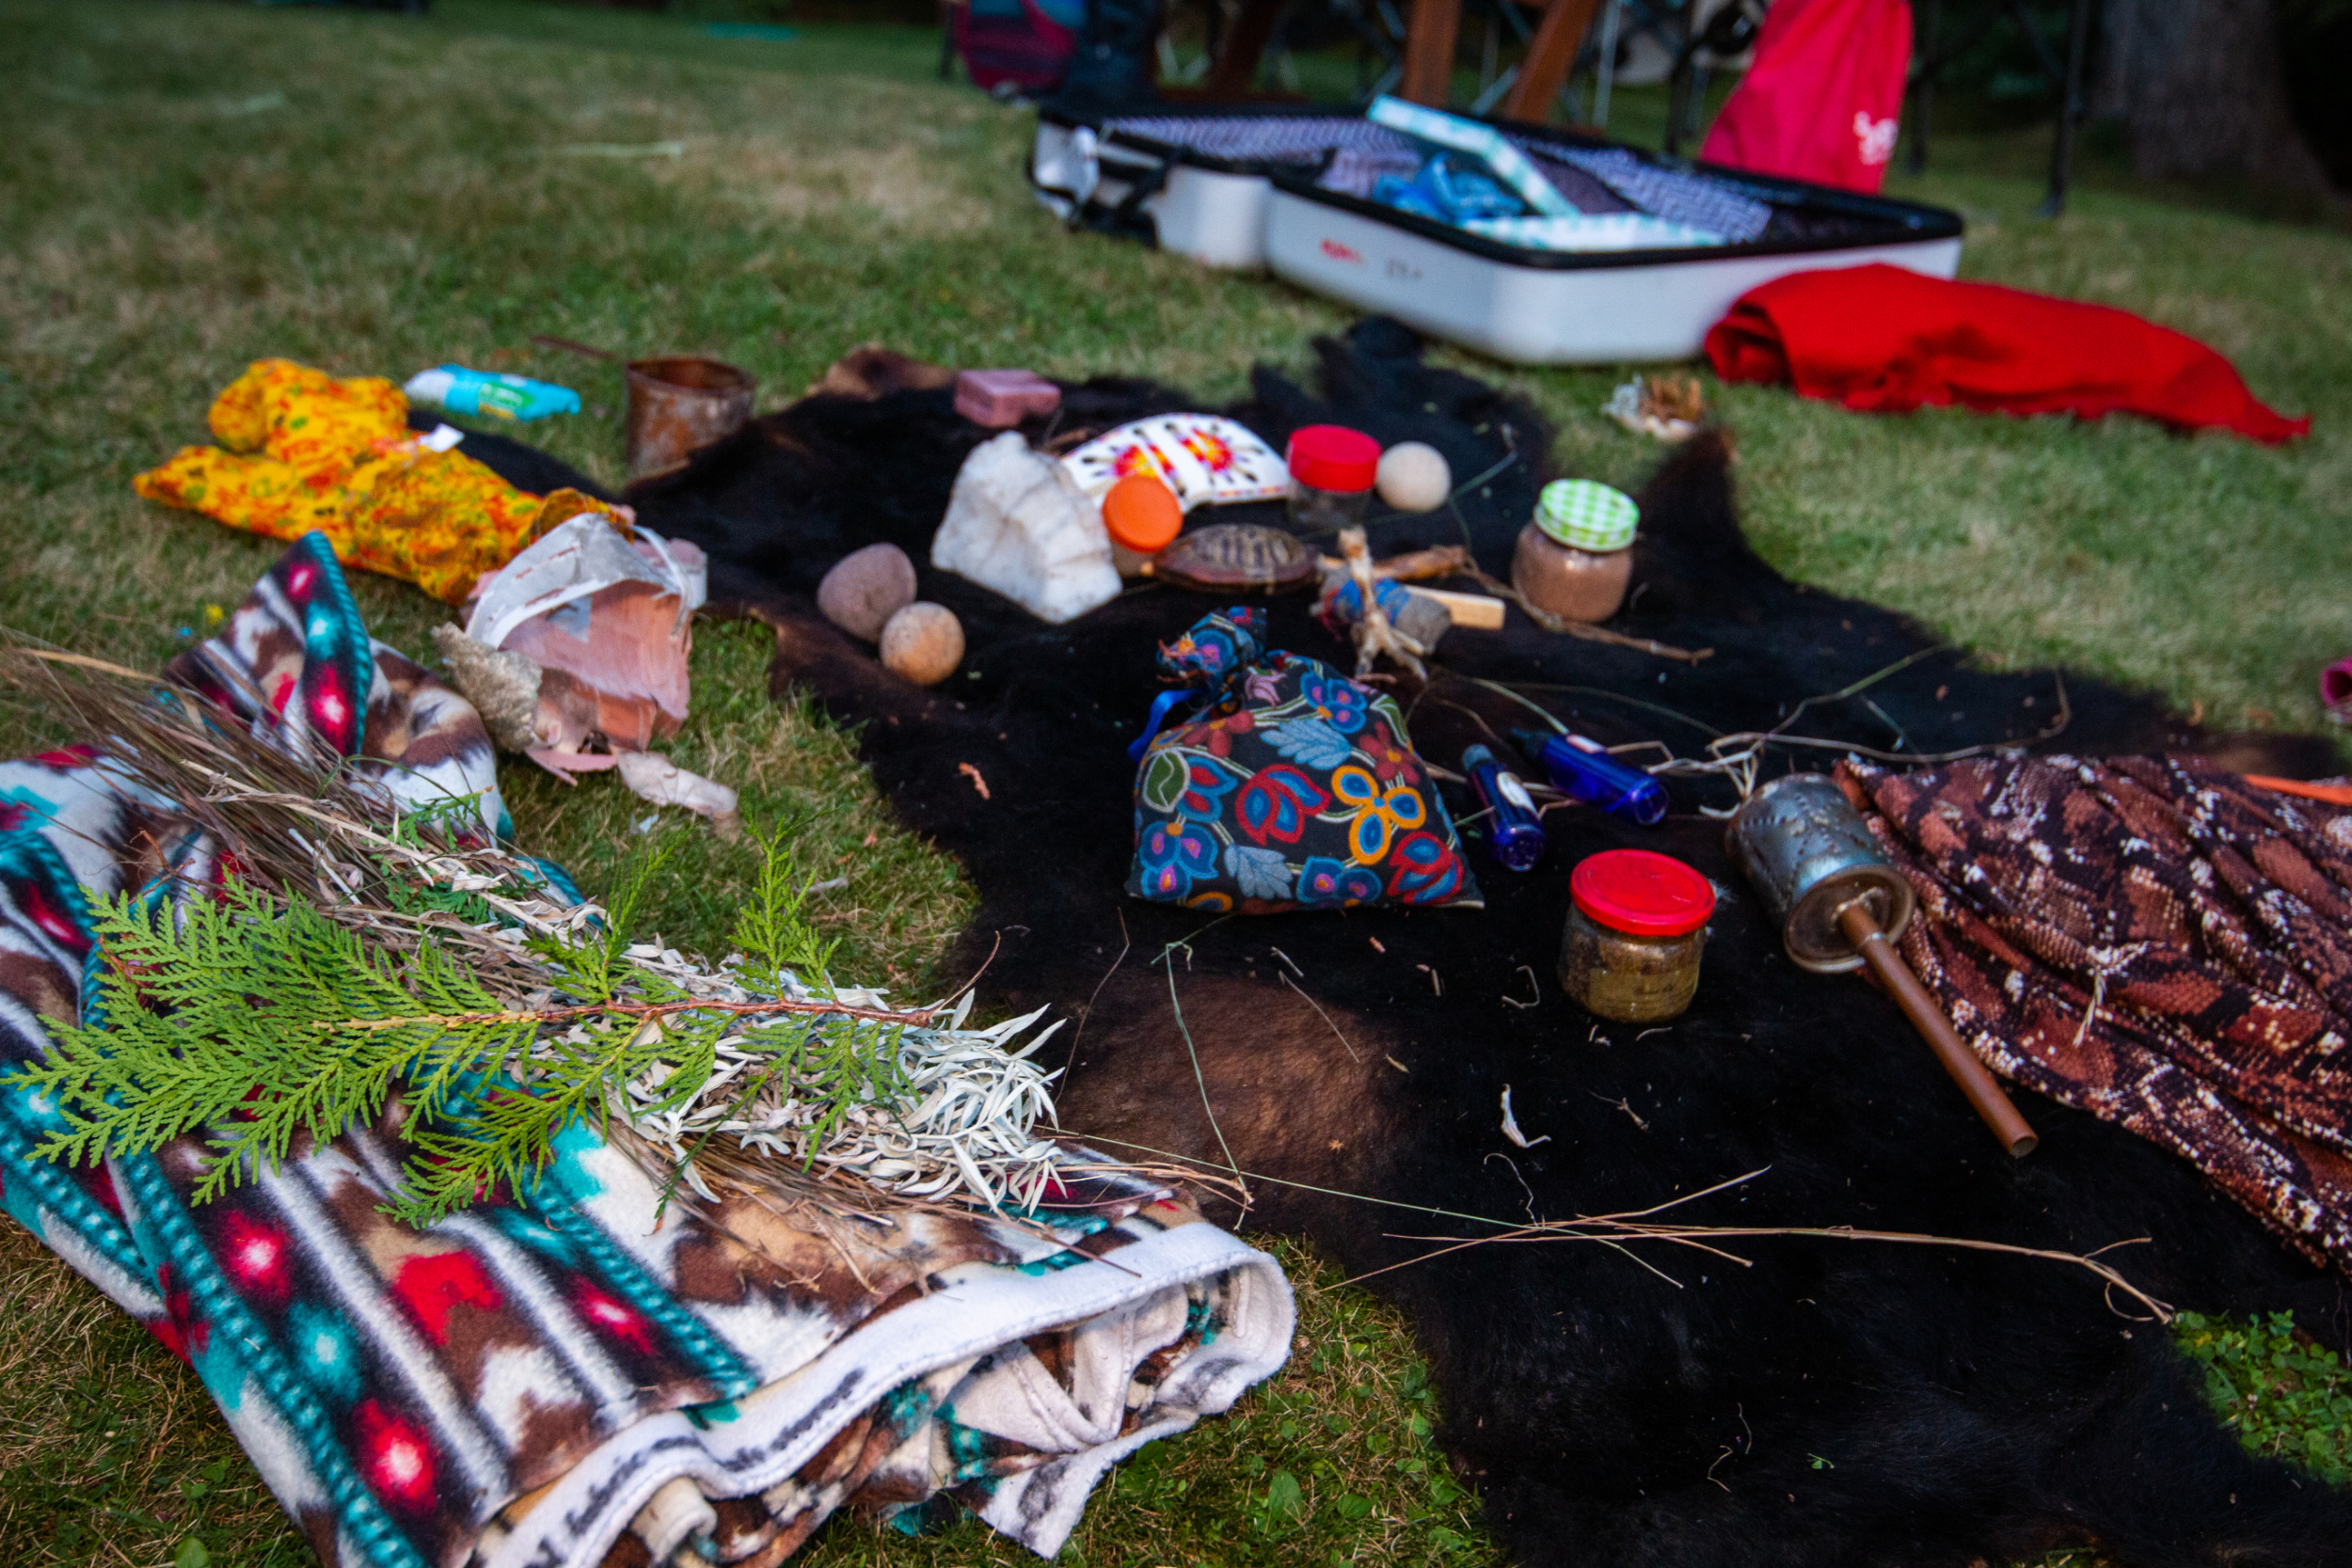 A cedar branch, blankets, a hide, a turtle shell rattle and other items spread out on grass